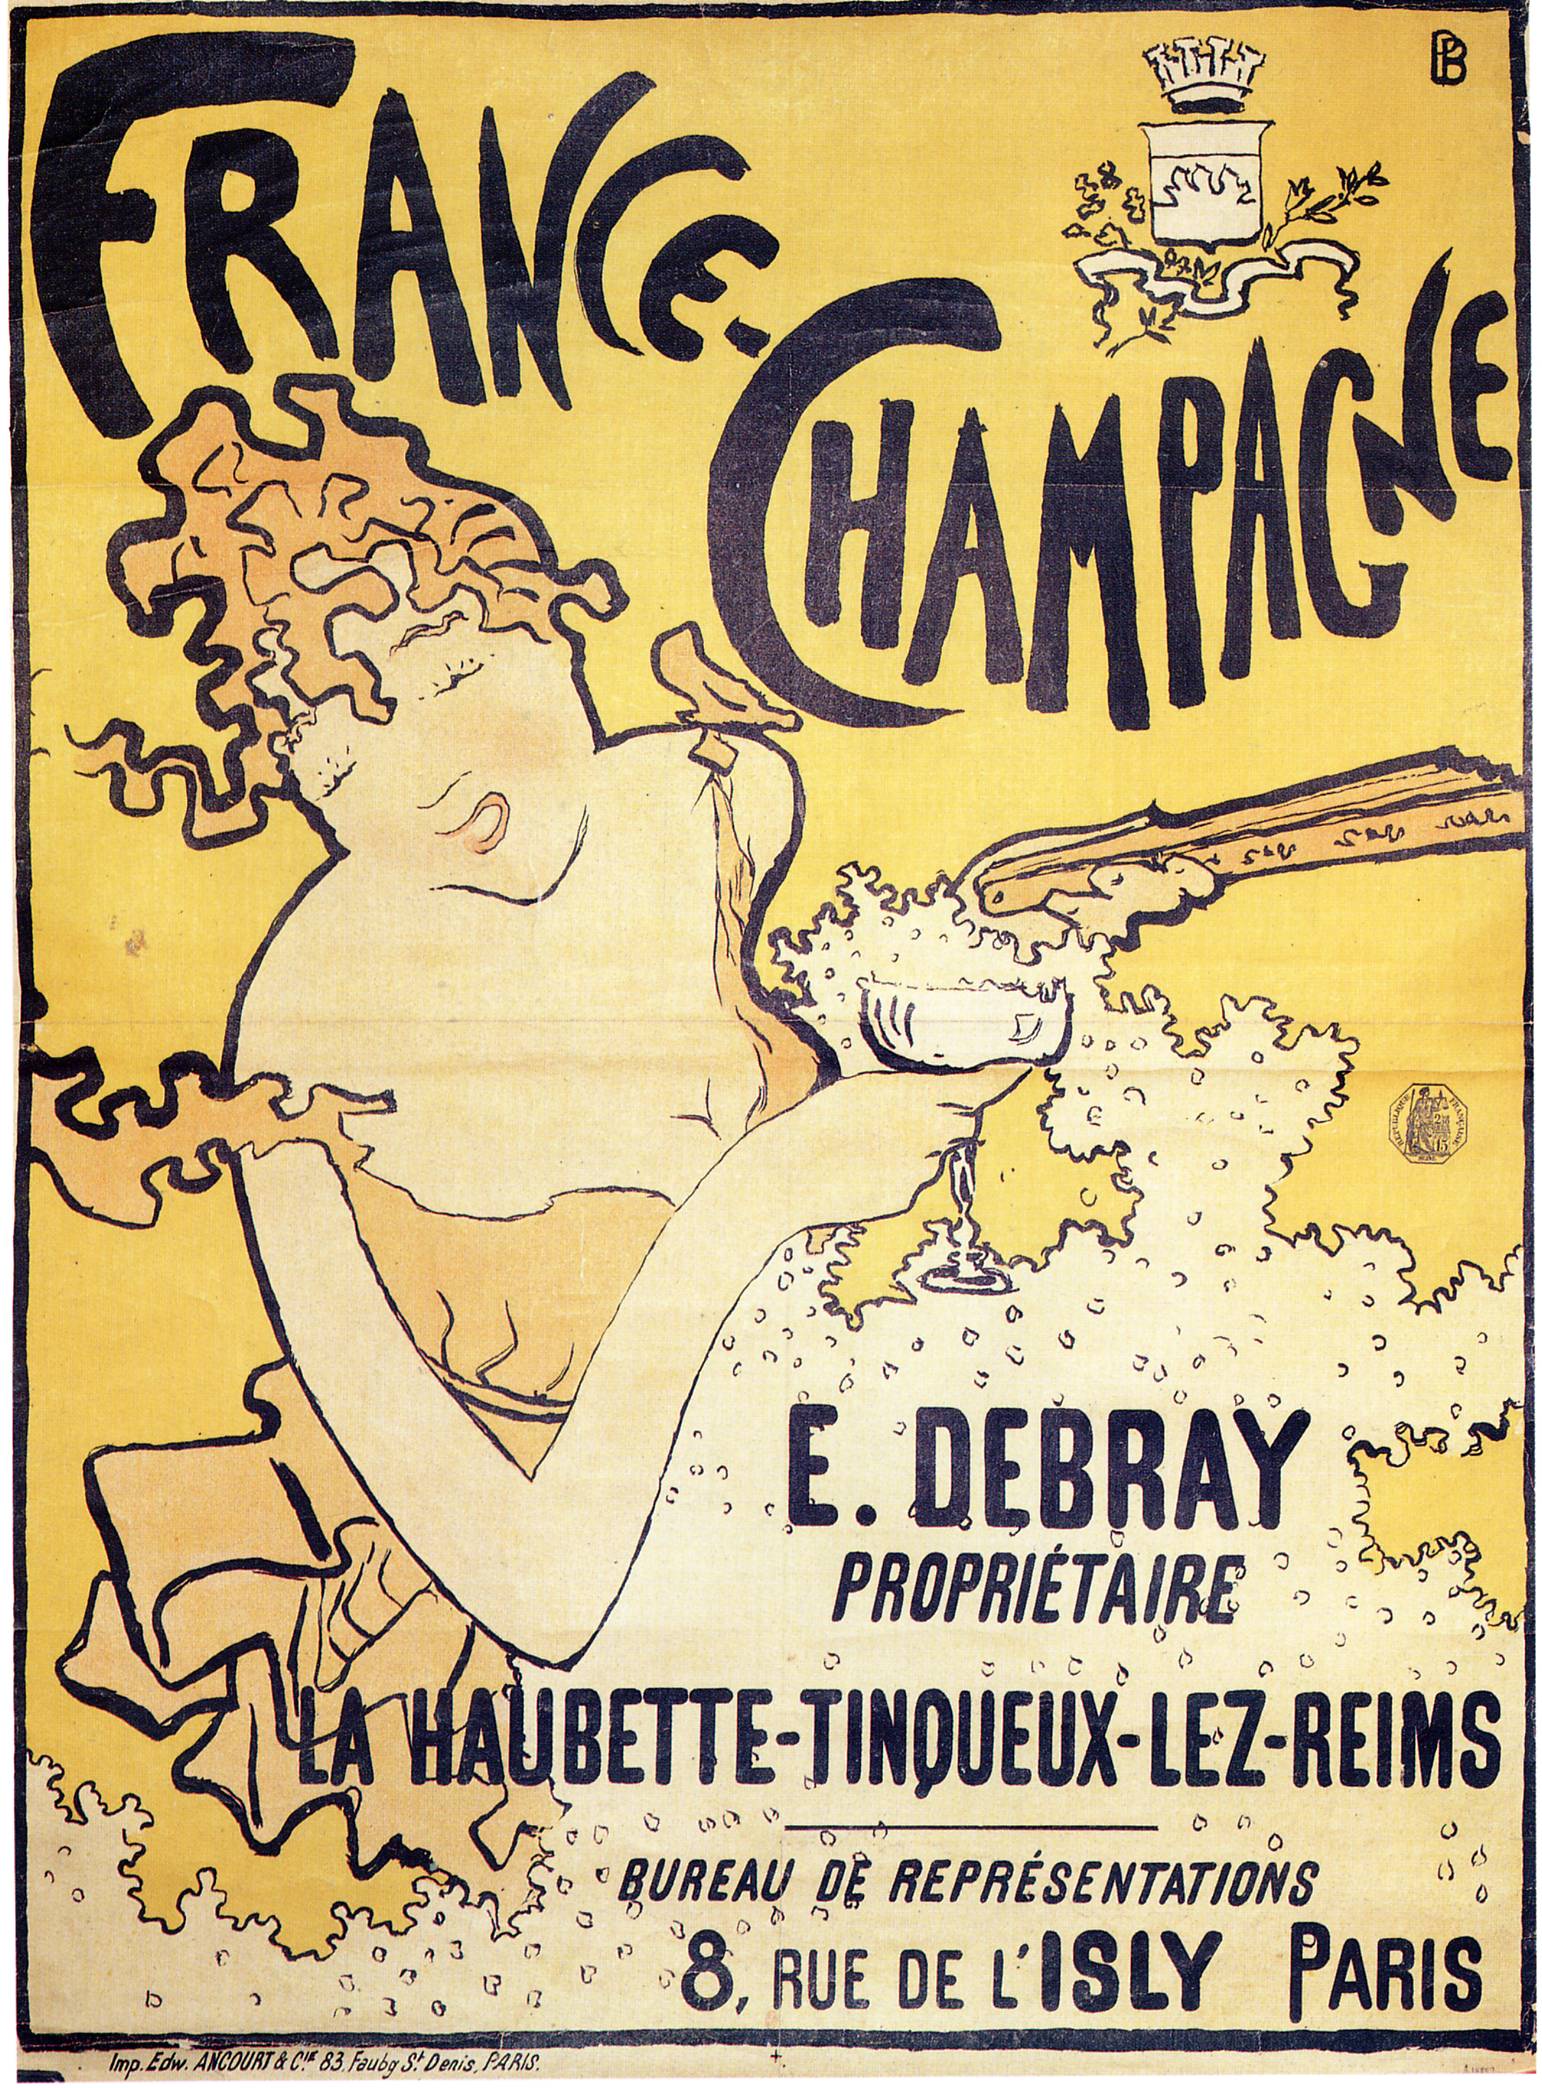 poster advertising France Champagne 